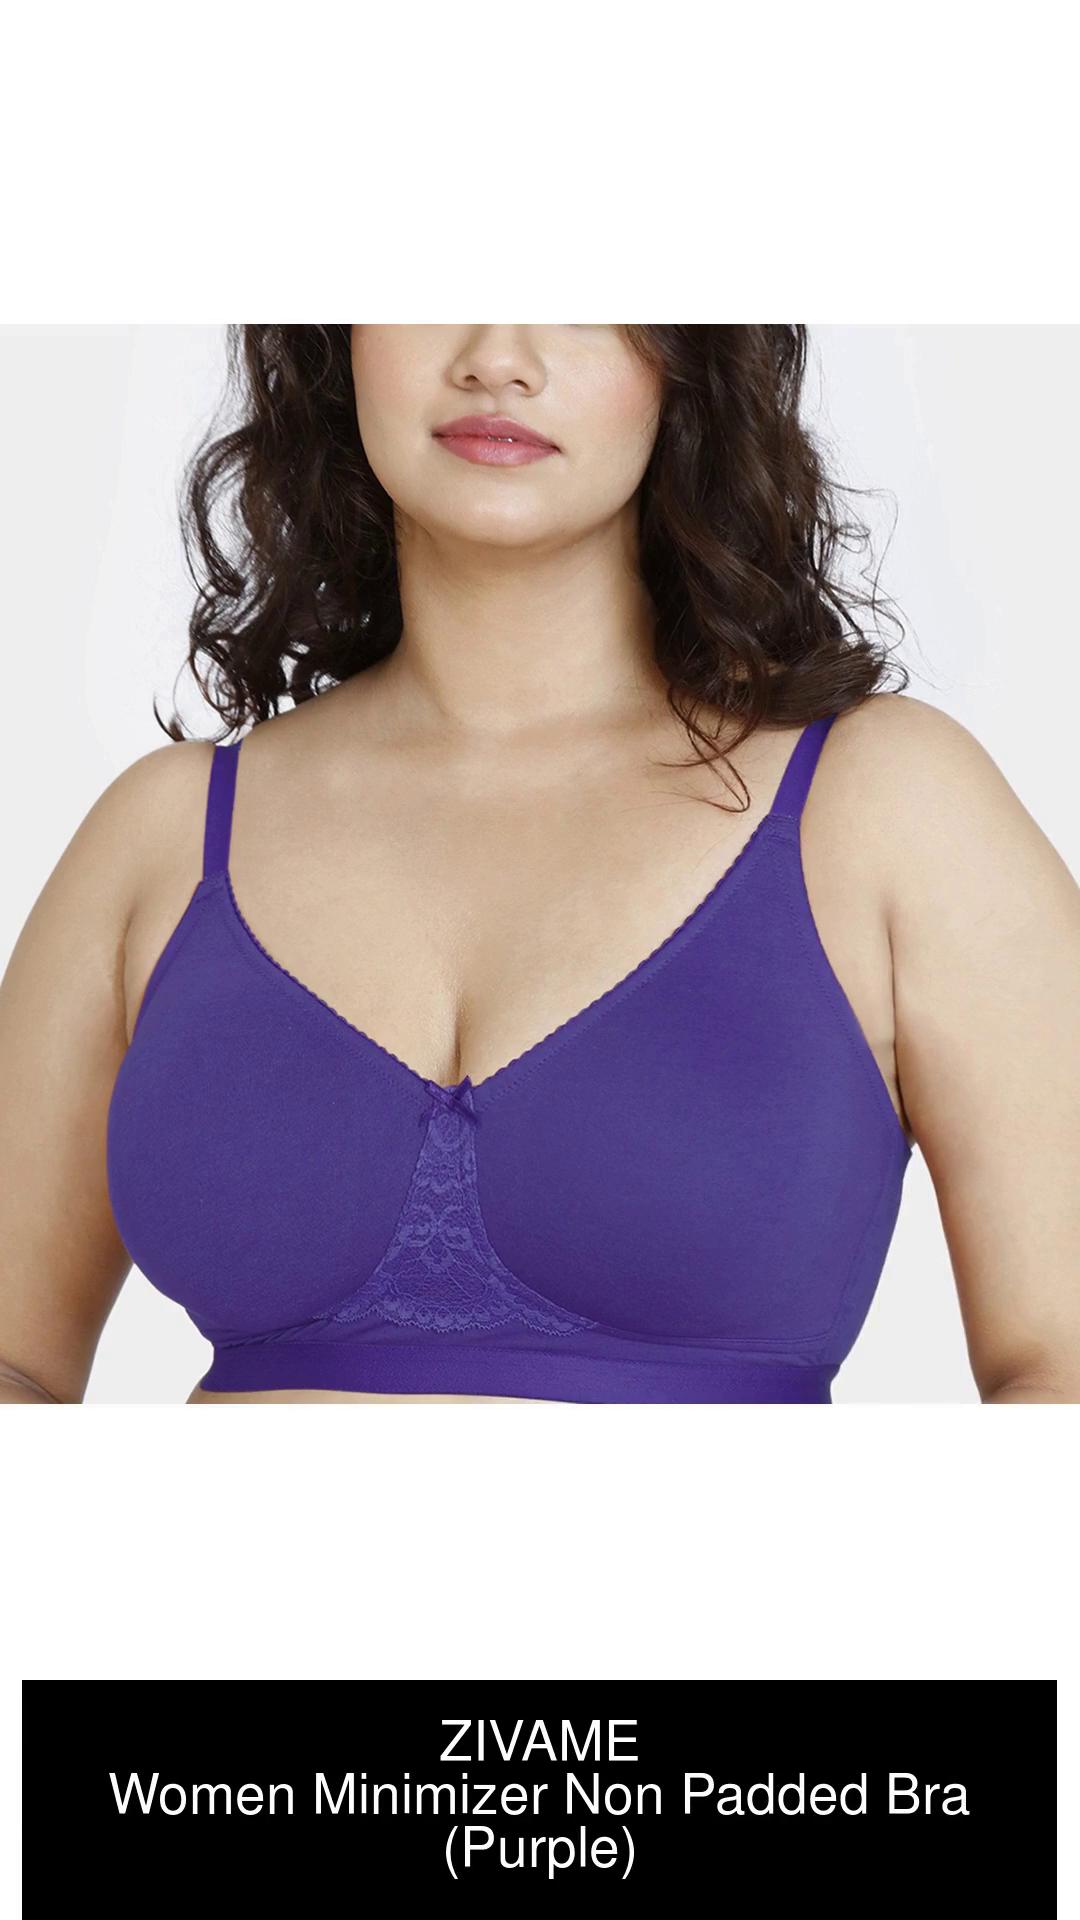 Buy ZIVAME Women Minimizer Non Padded Bra Online at Best Prices in India